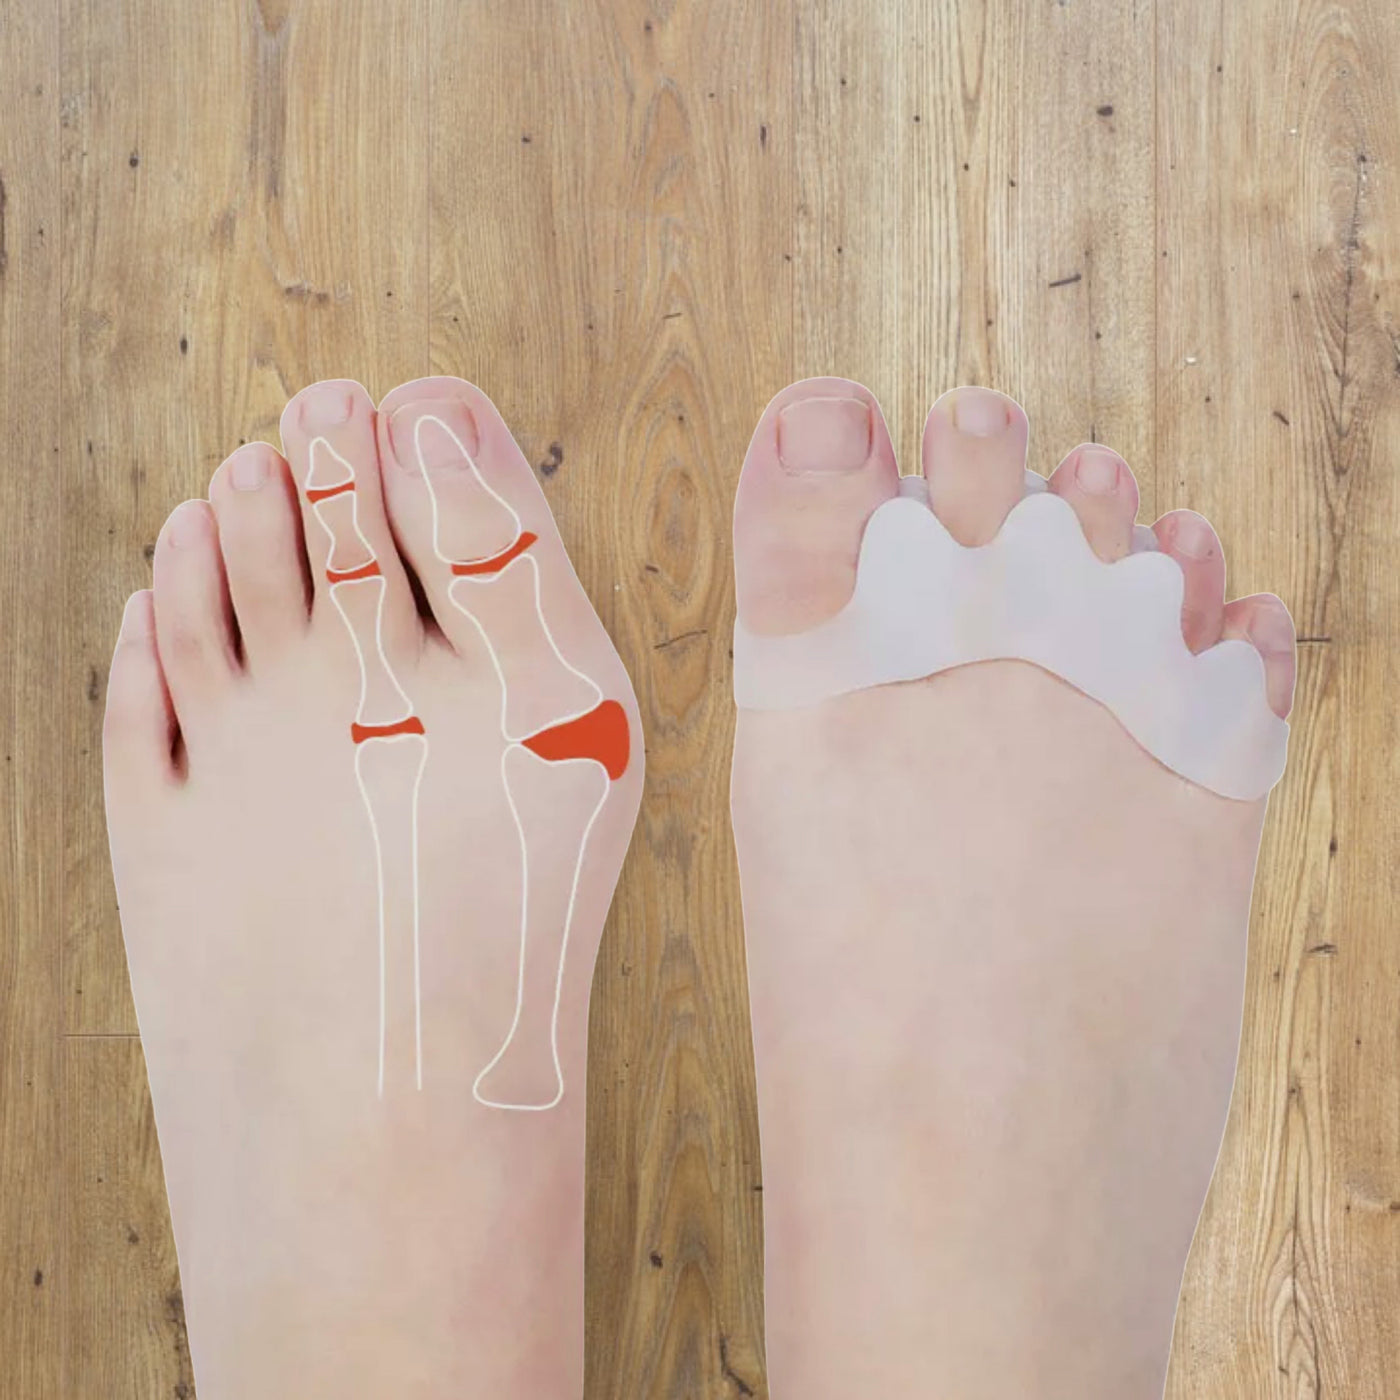 Toe spacers with @wellbybelle #foot #feet #shoes #barefoot #health